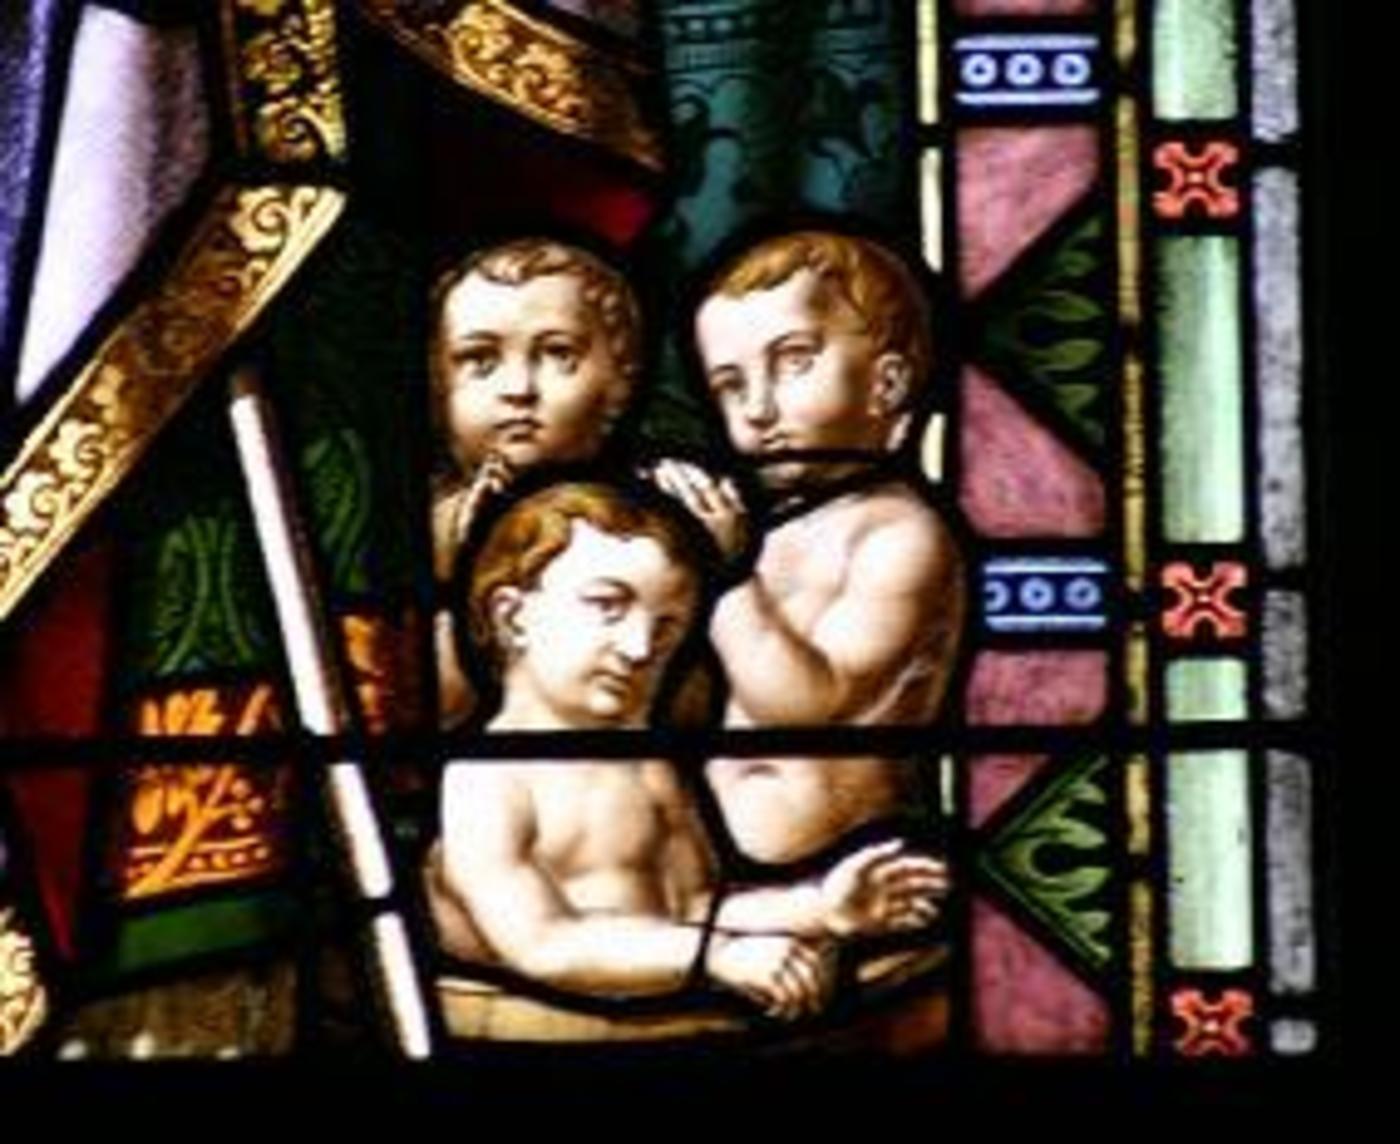 Windows 11A and11B: St. Nicholas of Myra and St. George the Martyr